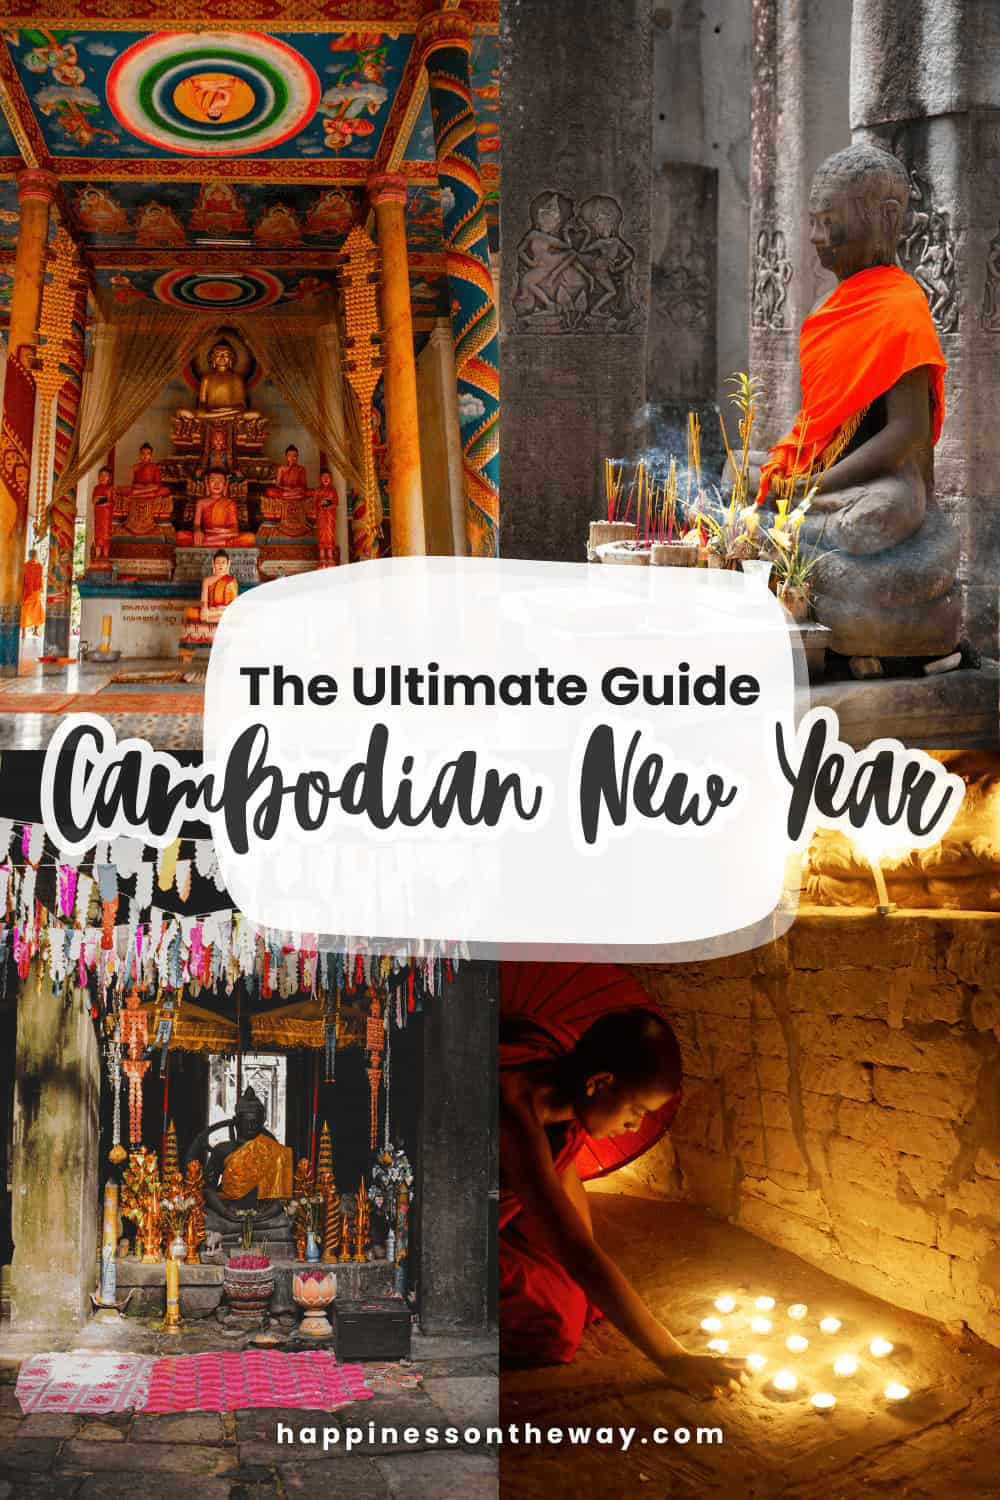 The Ultimate Guide to Cambodian New Year